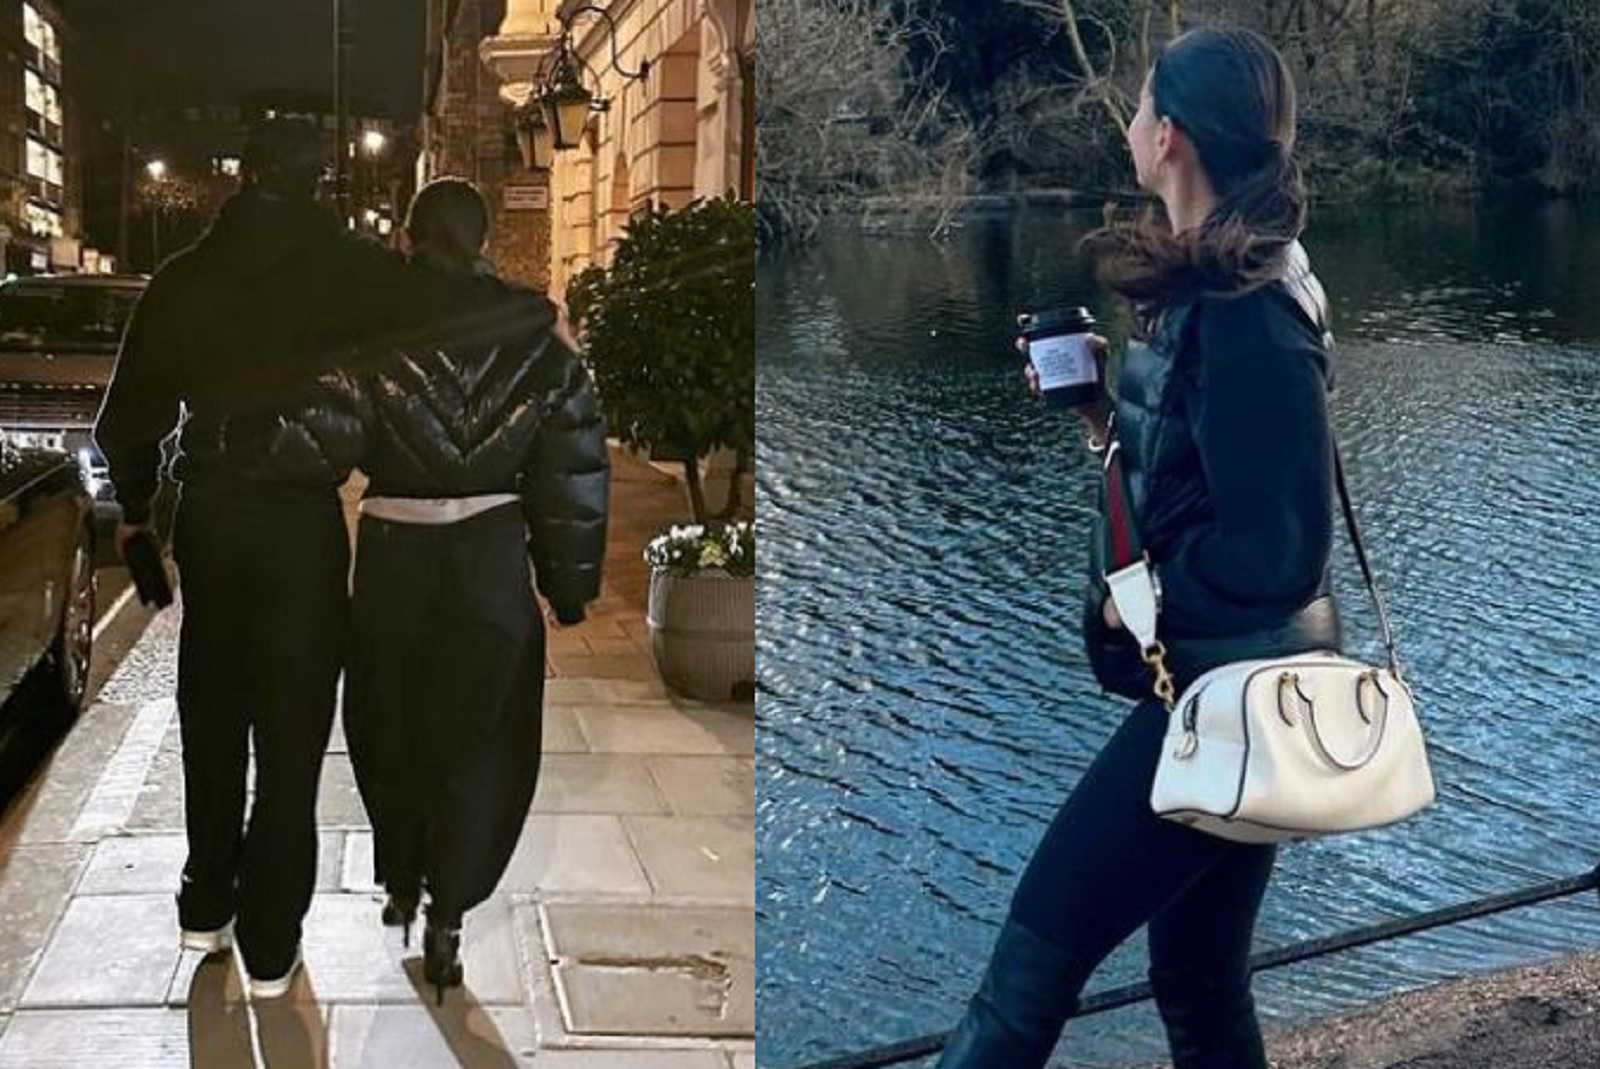 Alia Bhatt taking a stroll with hubby Ranbir Kapoor in her London diaries will melt your heart, fans miss baby Raha